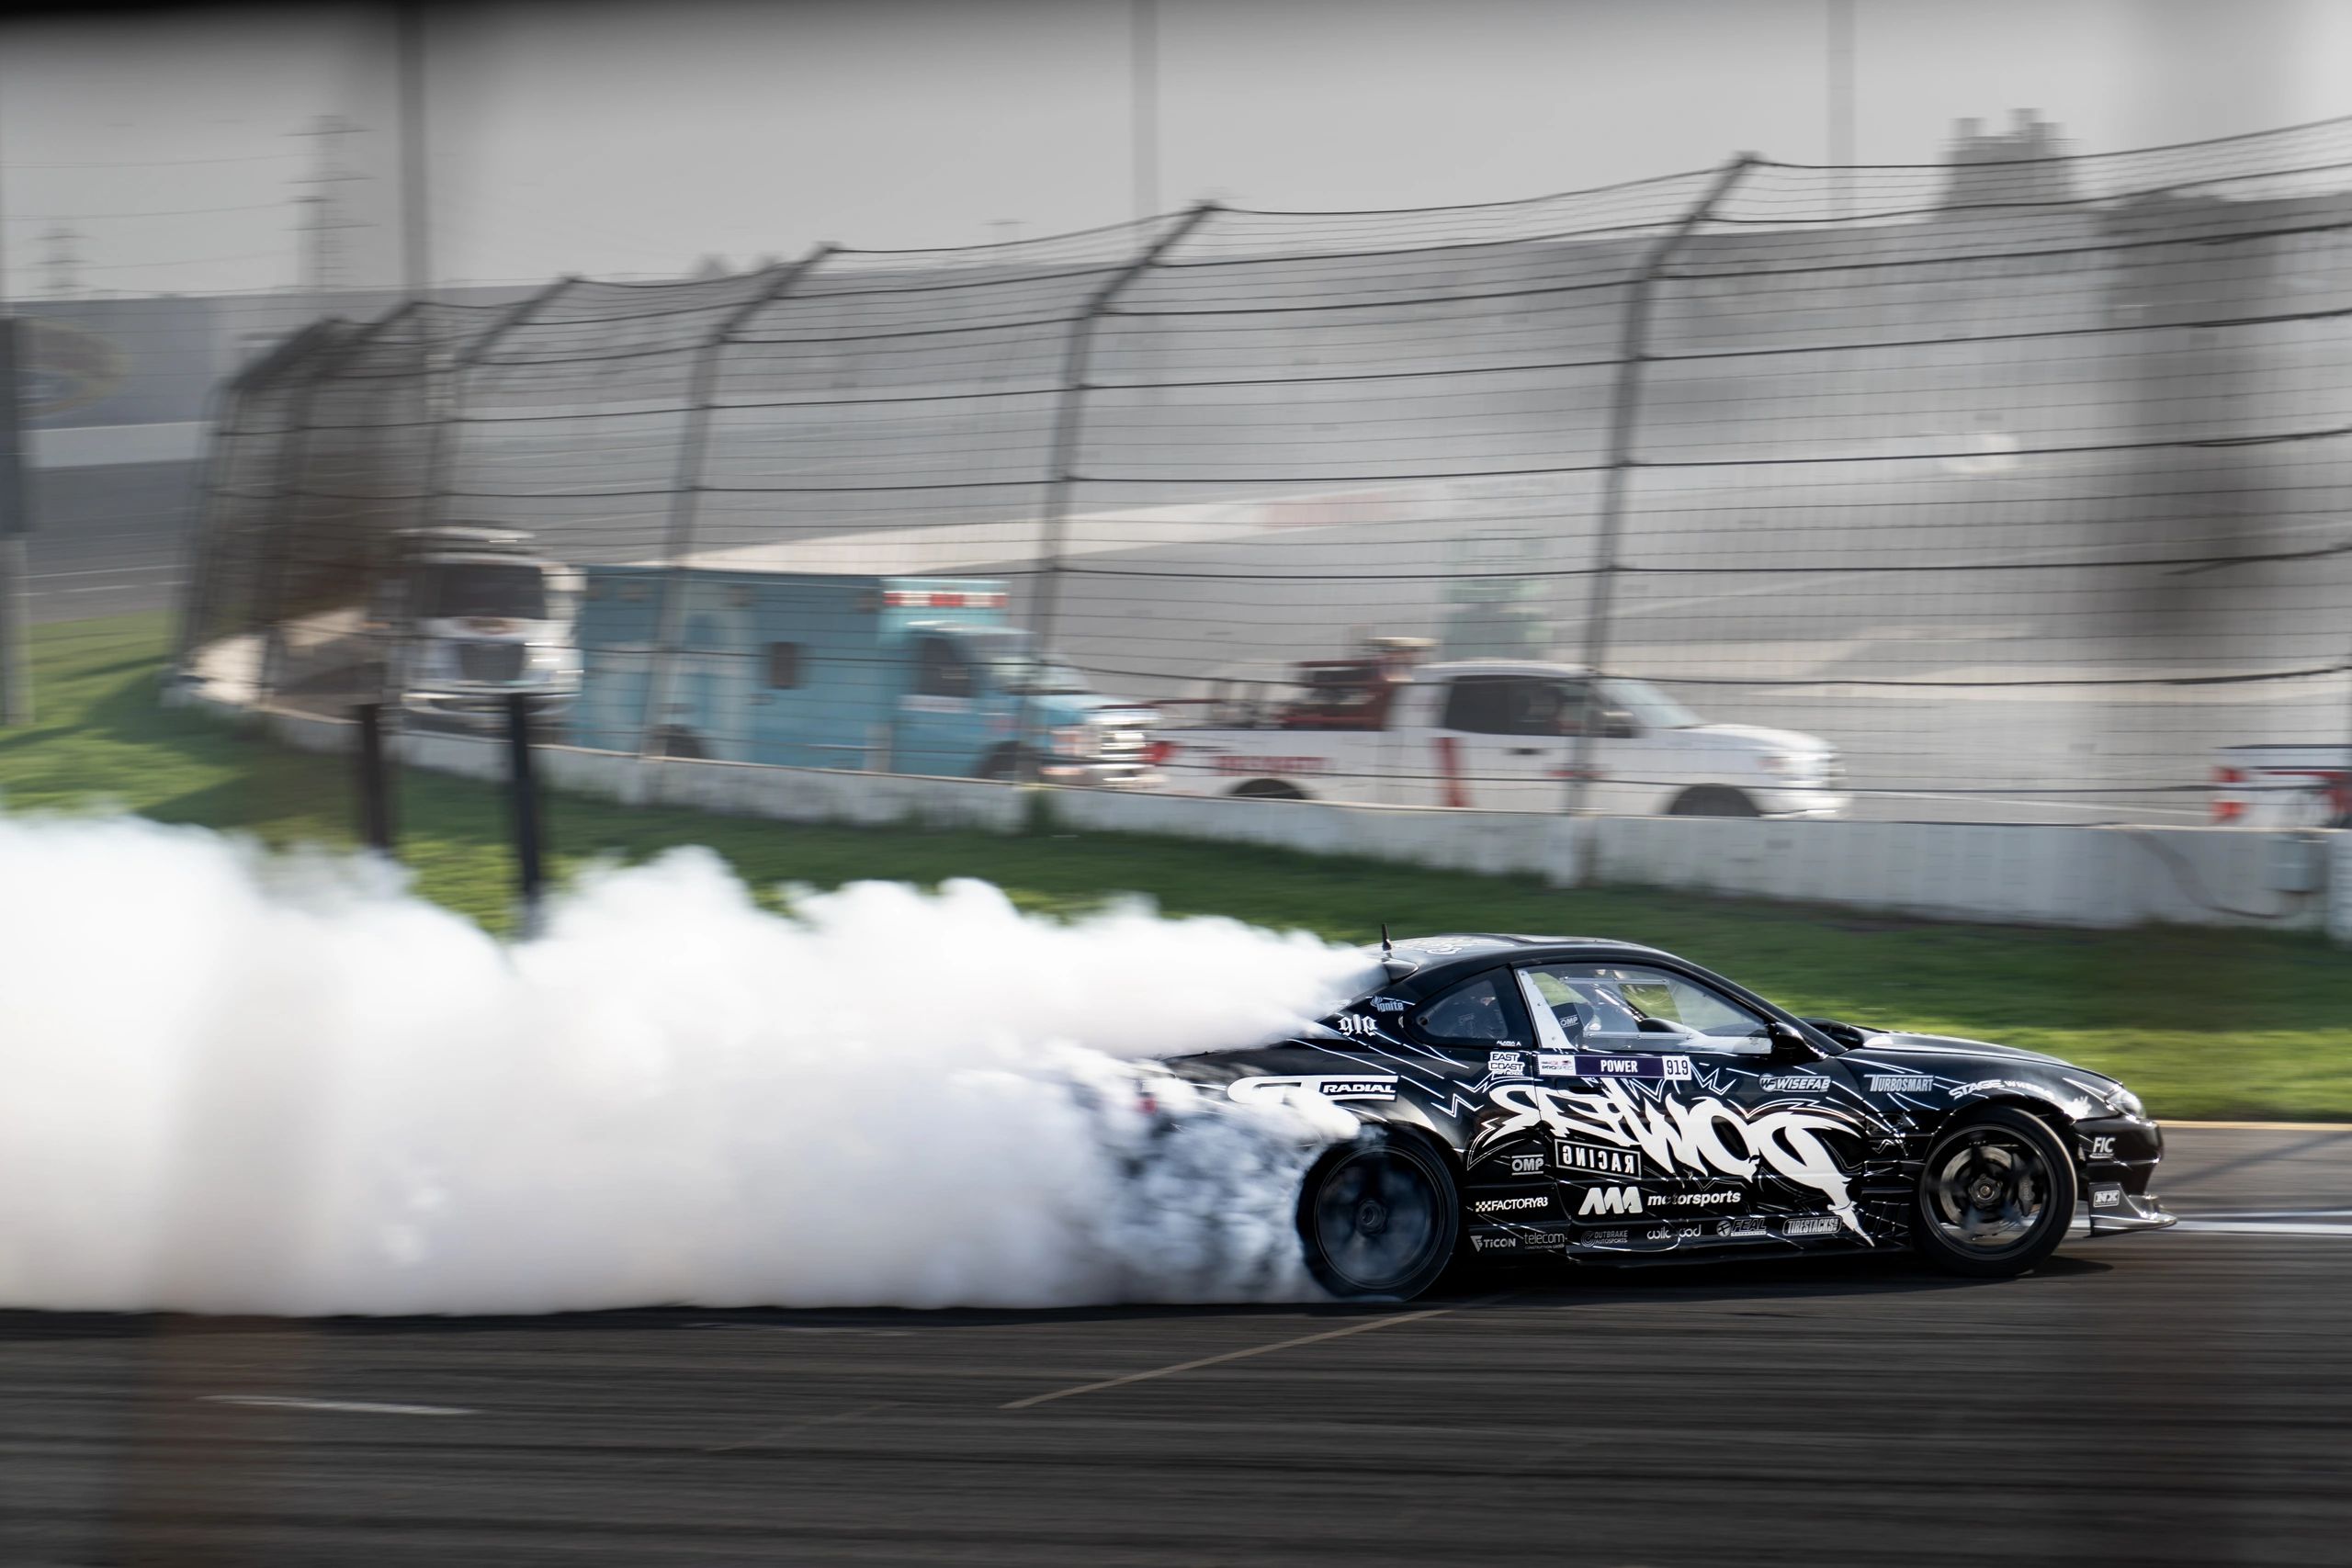 Drifting and racing photography near you, and services similar are what we offer. We love motorsport